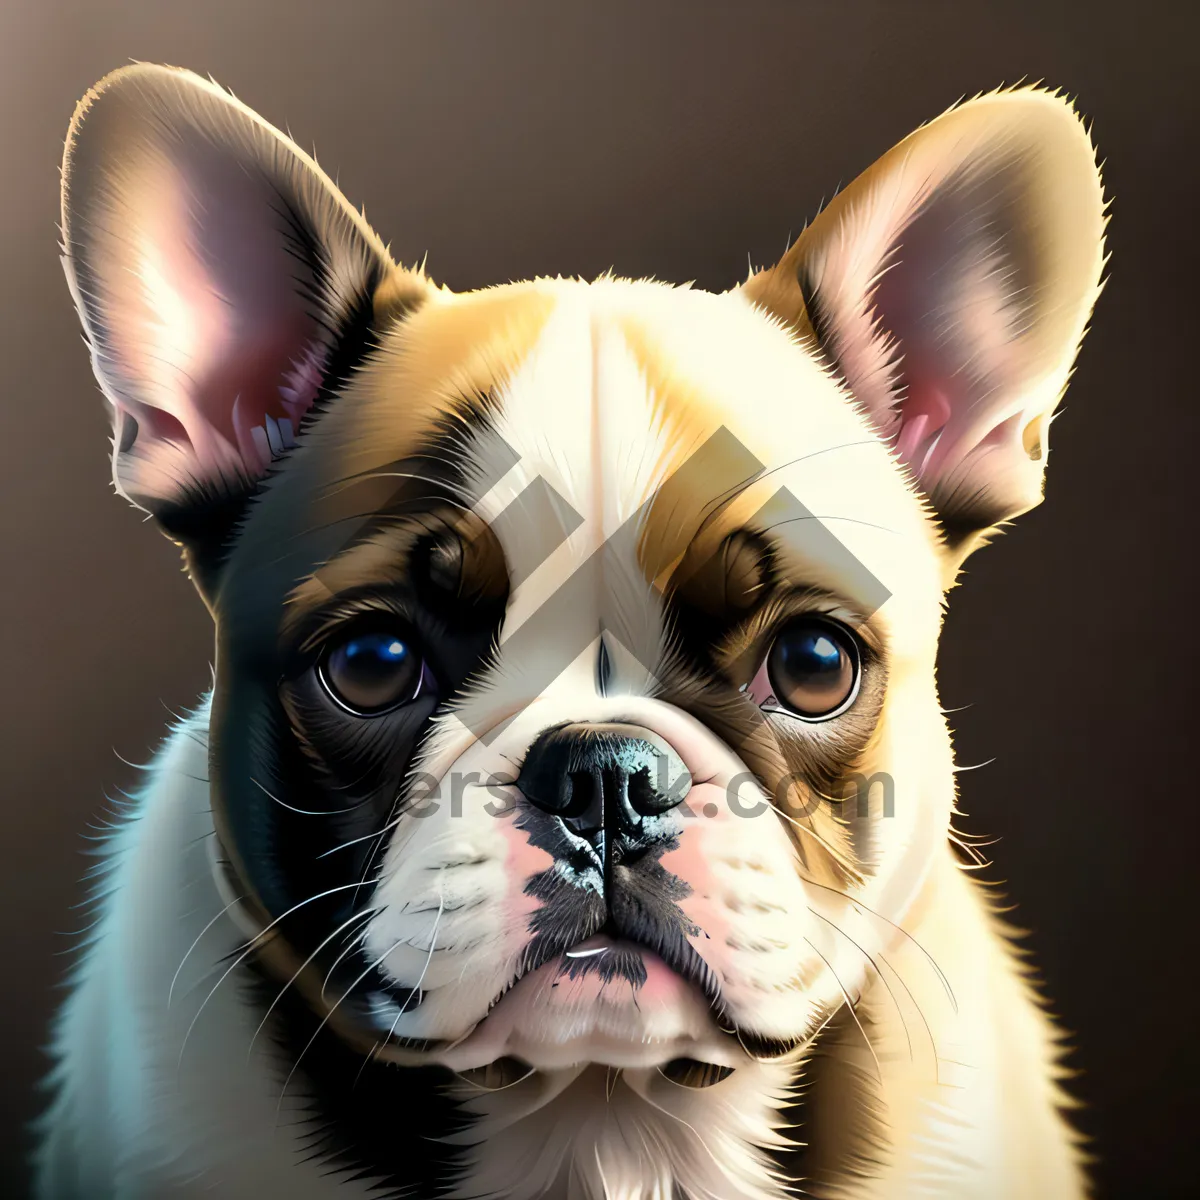 Picture of Adorable Bulldog Terrier: Wrinkle-faced, Purebred Canine